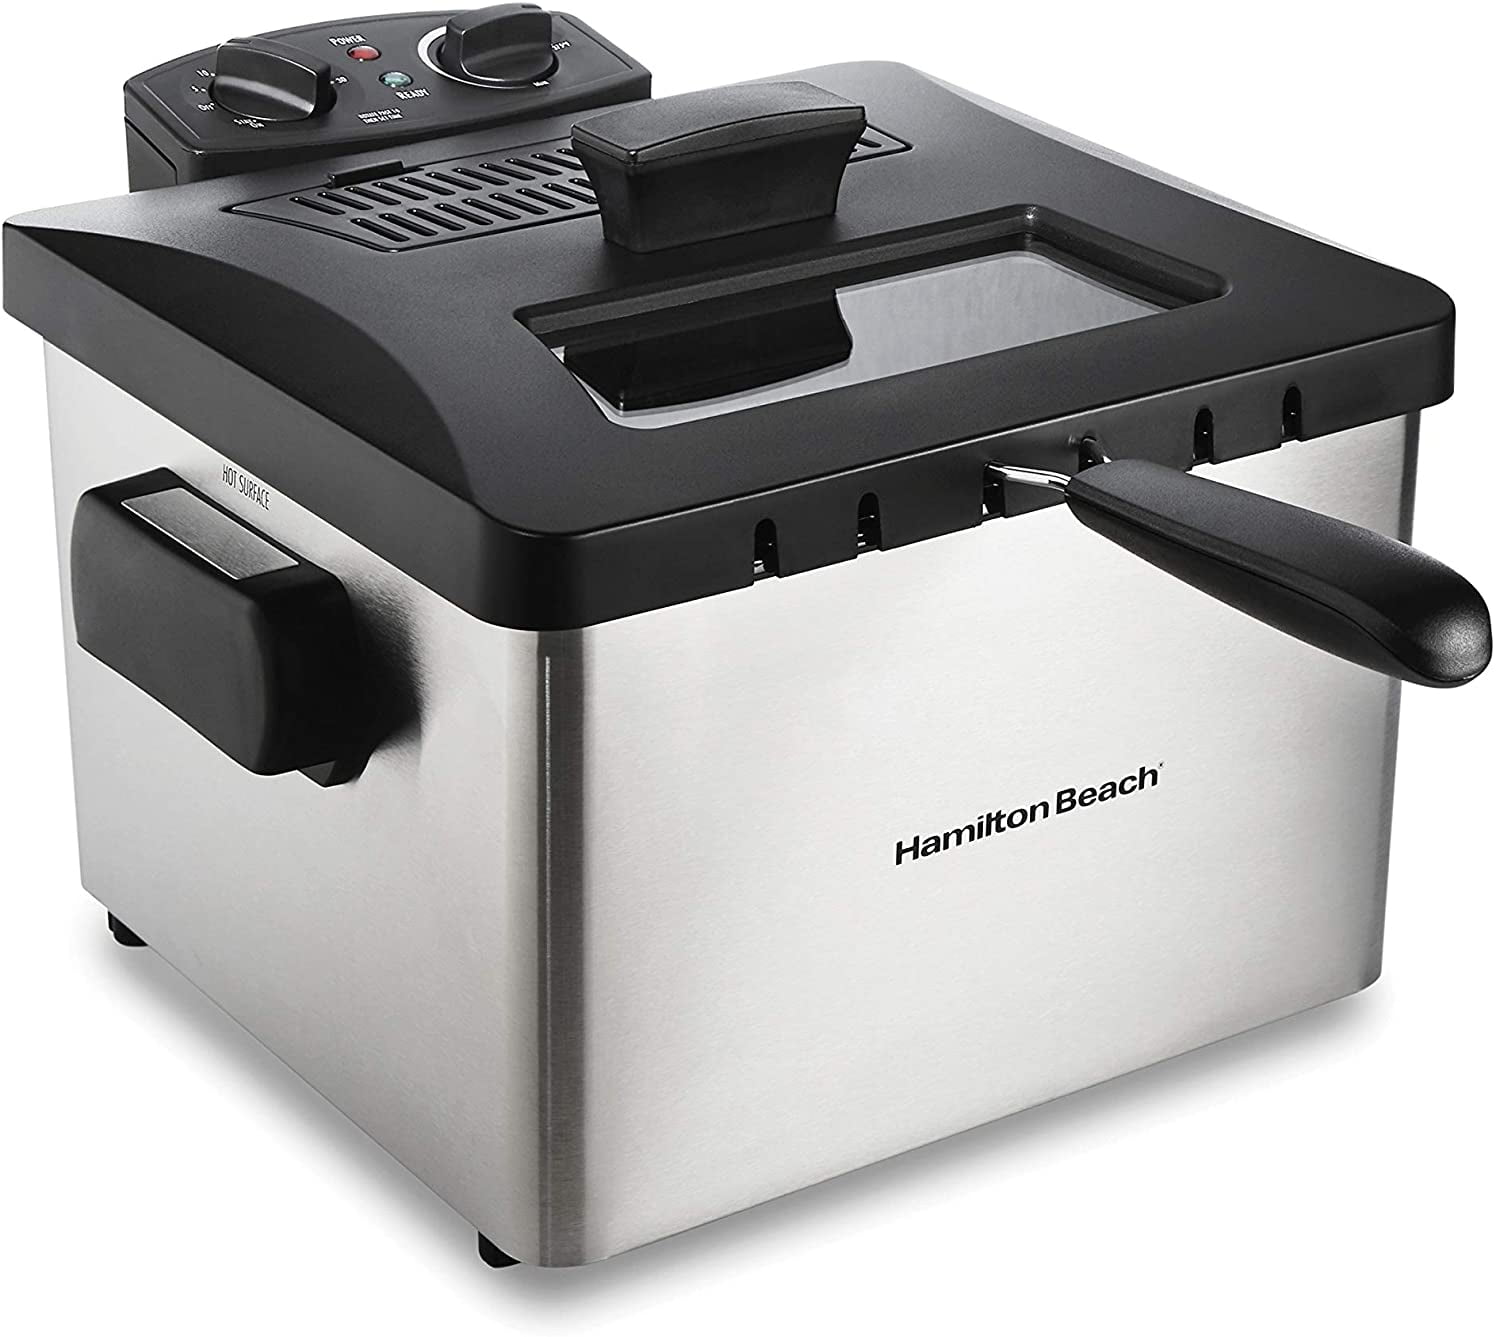 Hamilton Beach Triple Basket Electric Deep Fryer, 4.7 Quarts / 19 Cups Oil  Capacity, Lid with View Window, Professional Style, 1800 Watts, Stainless